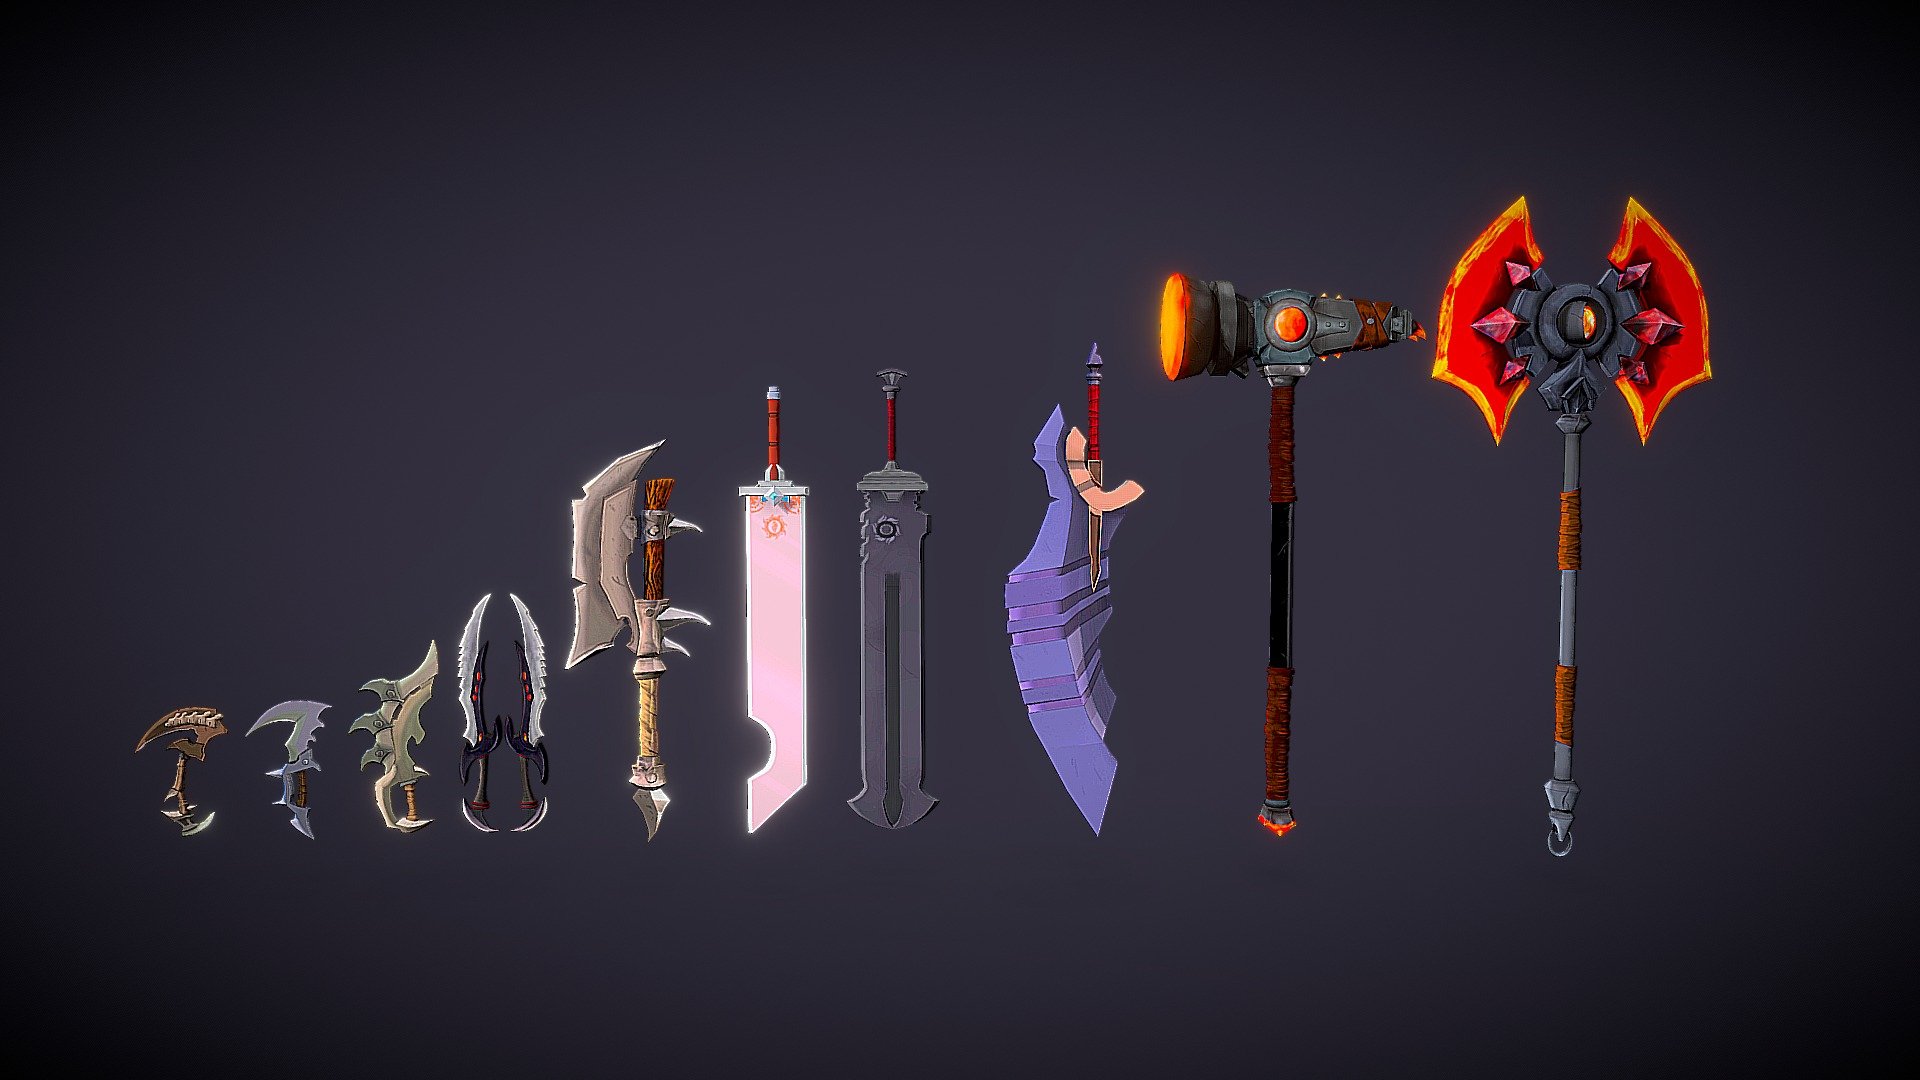 low poly weapon pack
created in blender 2.91
   more detail on the link &gt;&gt; www.artstation.com/artwork/zOYOoD

www.instagram.com/scrawl_h/ - pack of 10 low poly fantasy weapons - Buy Royalty Free 3D model by H.art 3d model